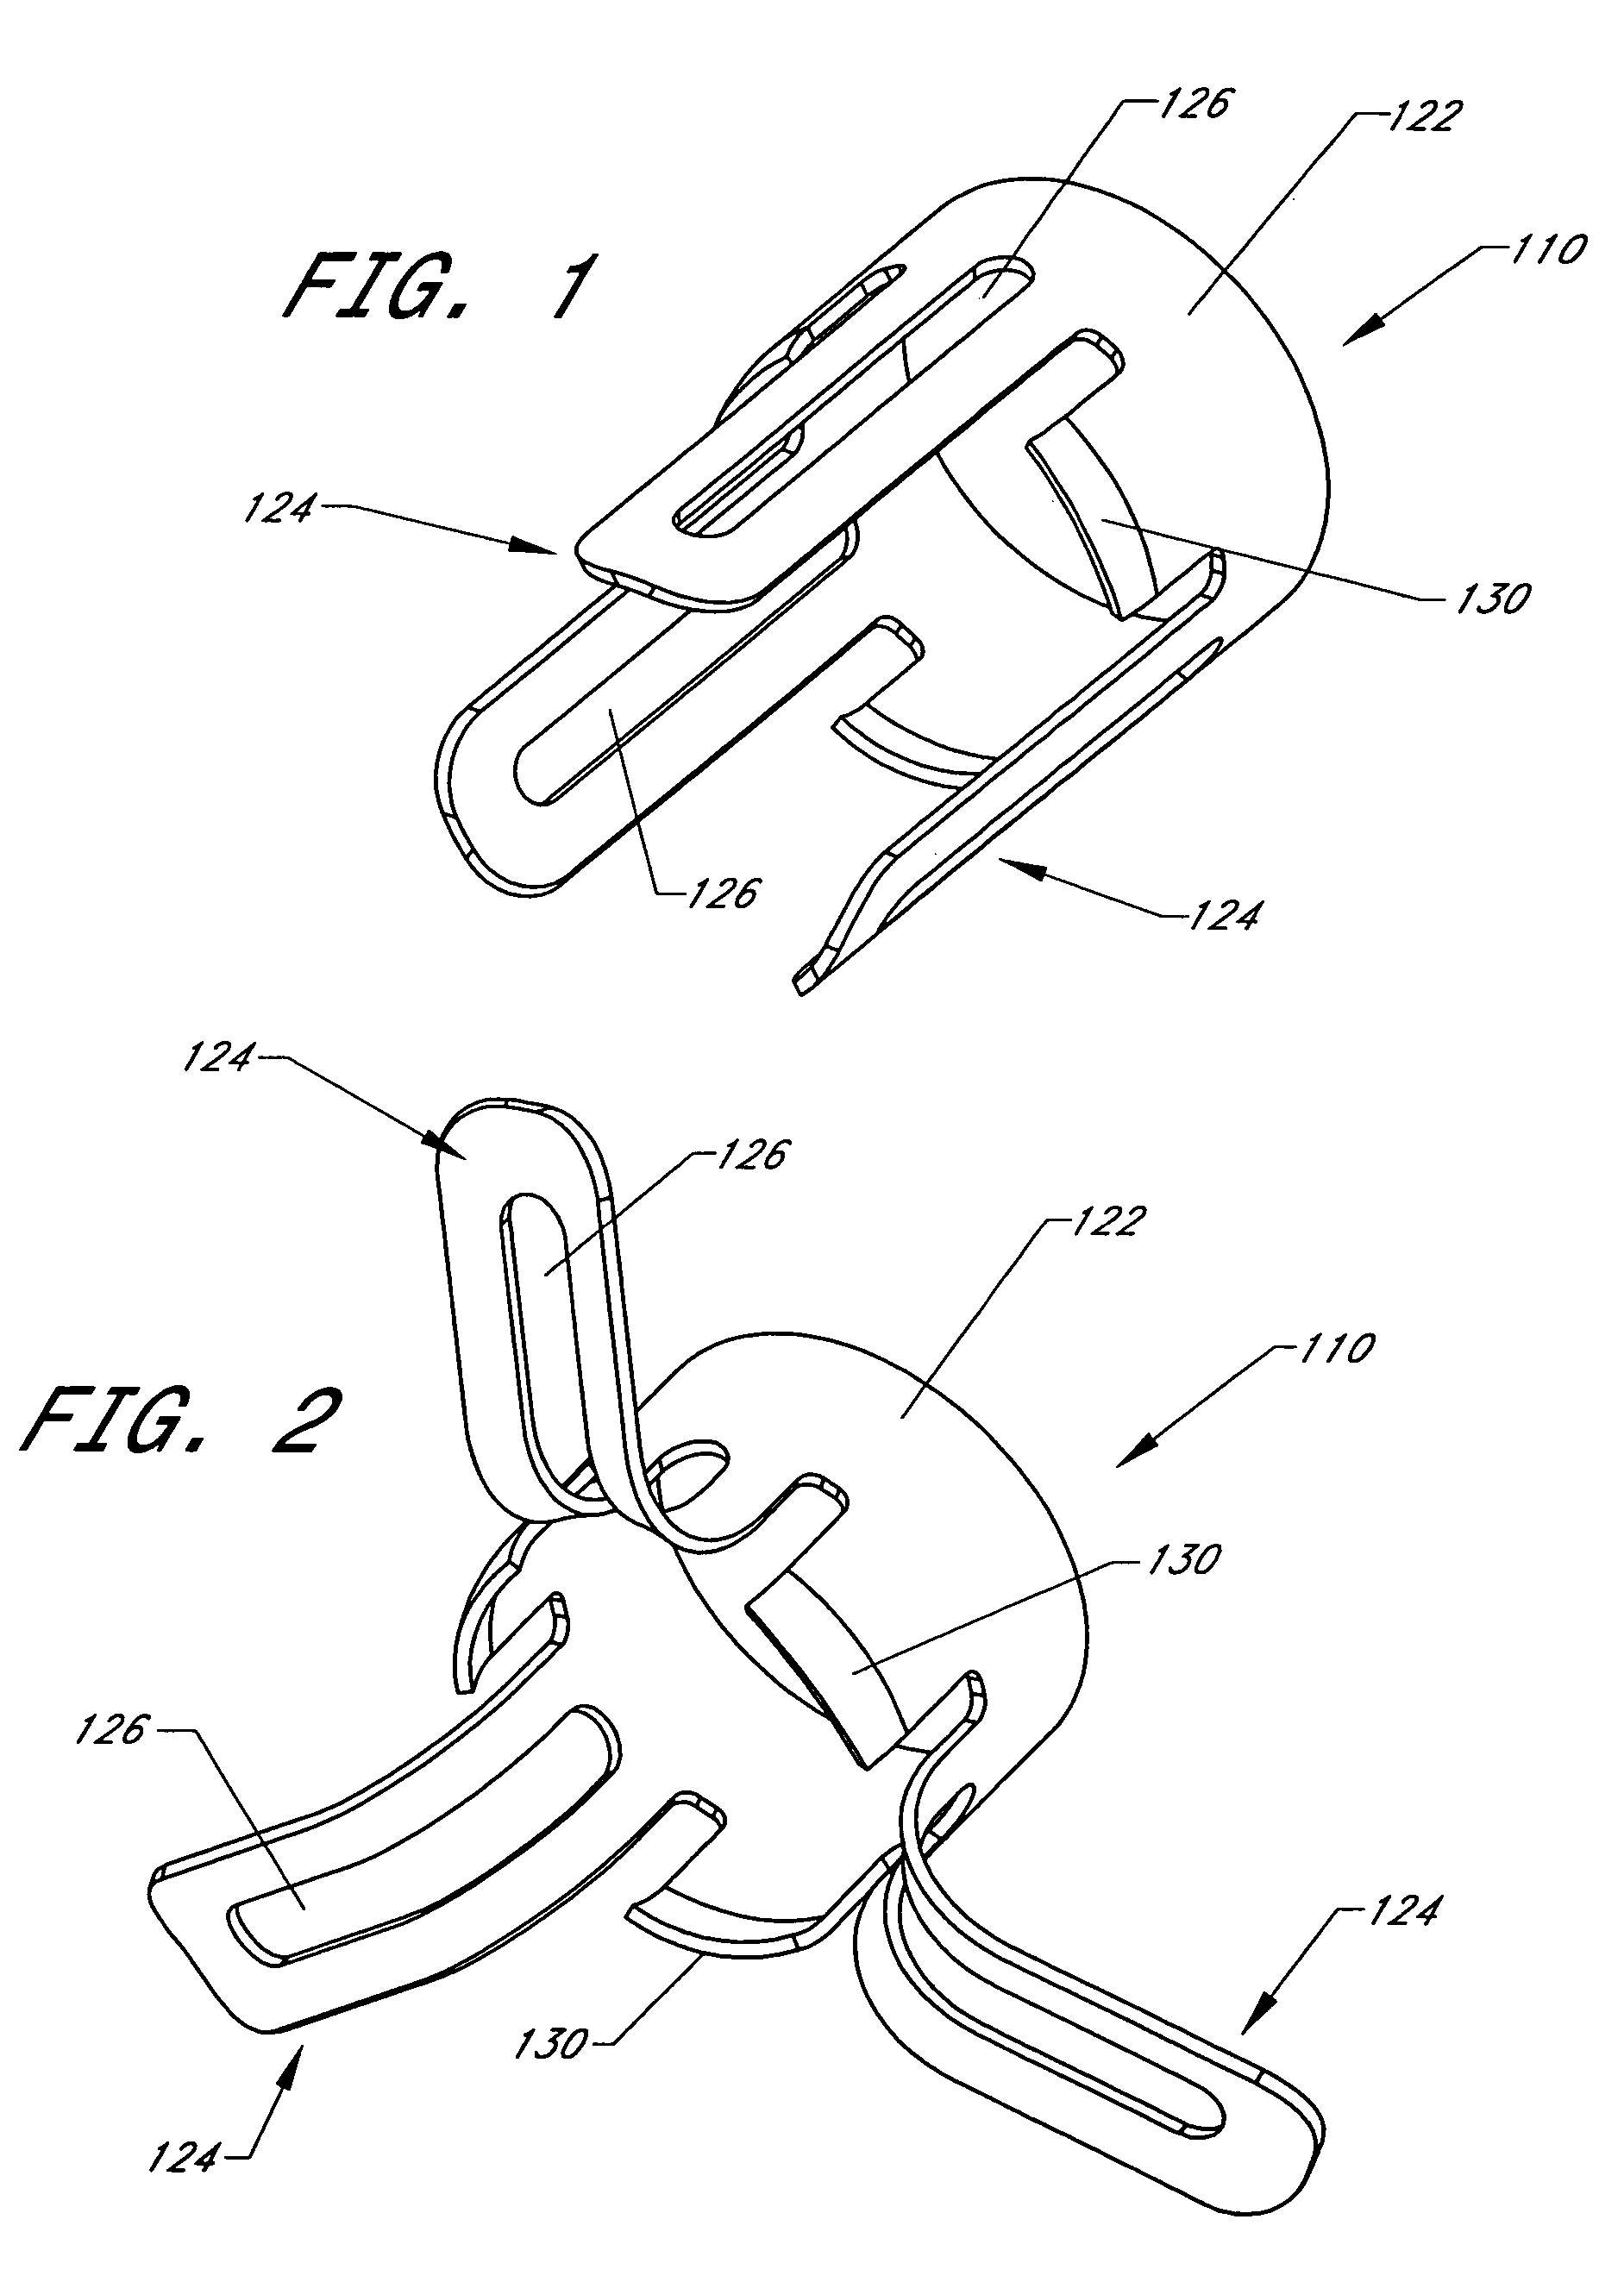 Cardiovascular anchoring device and method of deploying same